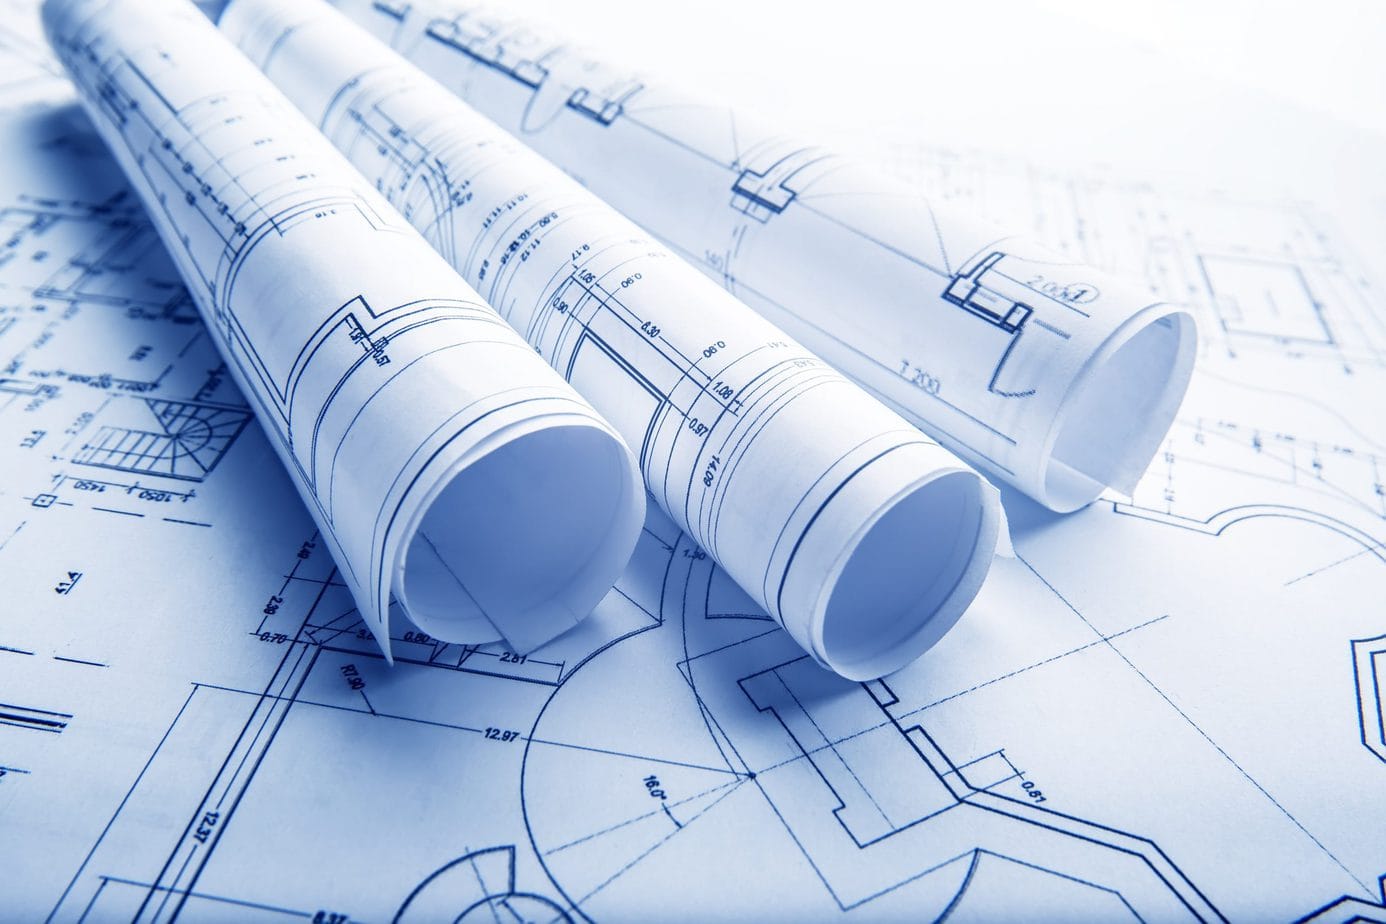 Why are Blueprints Called Blueprints?